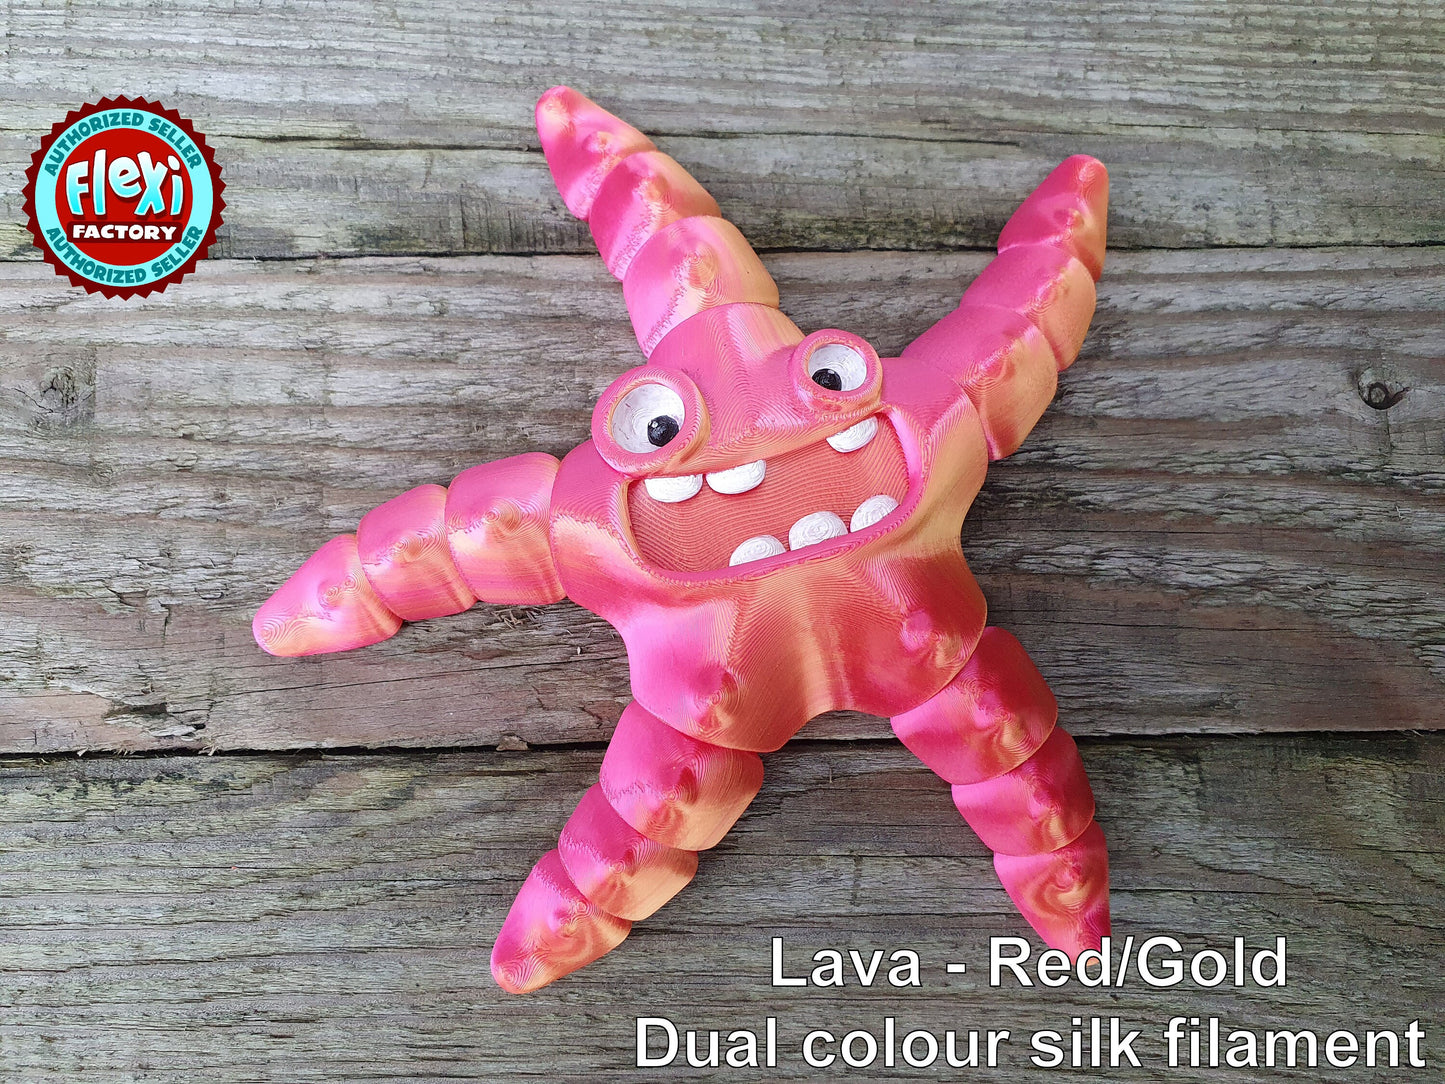 Goofy Flexi Starfish -  Articulated Flexible 3D Print. Professionally Hand painted finishing details